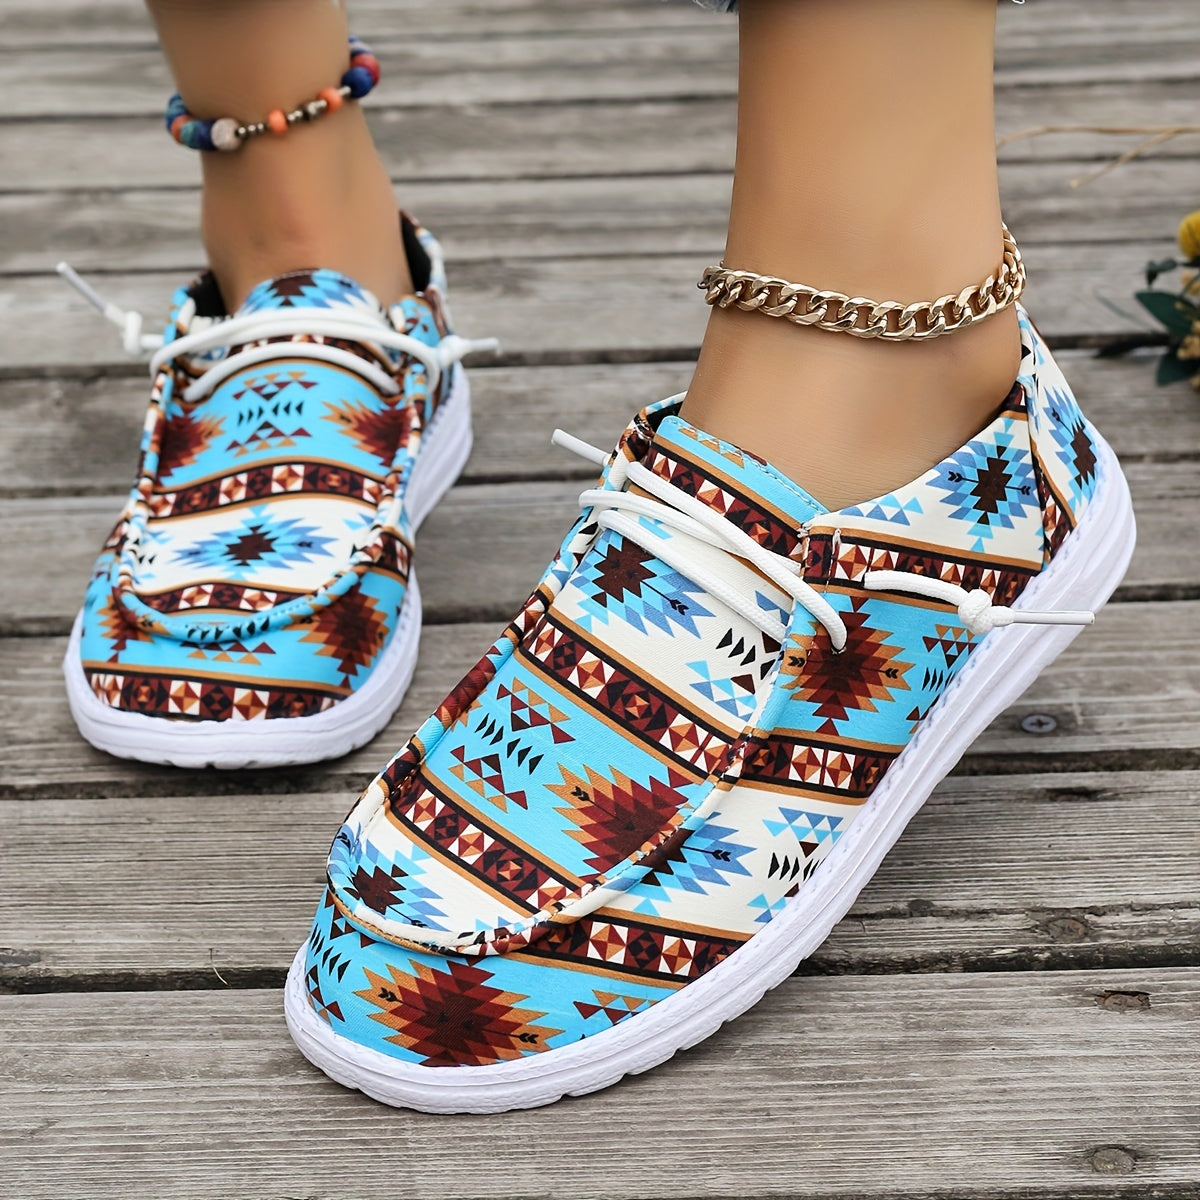 Geometric Pattern Canvas Shoes, Casual Lace Up Low Top Sneakers